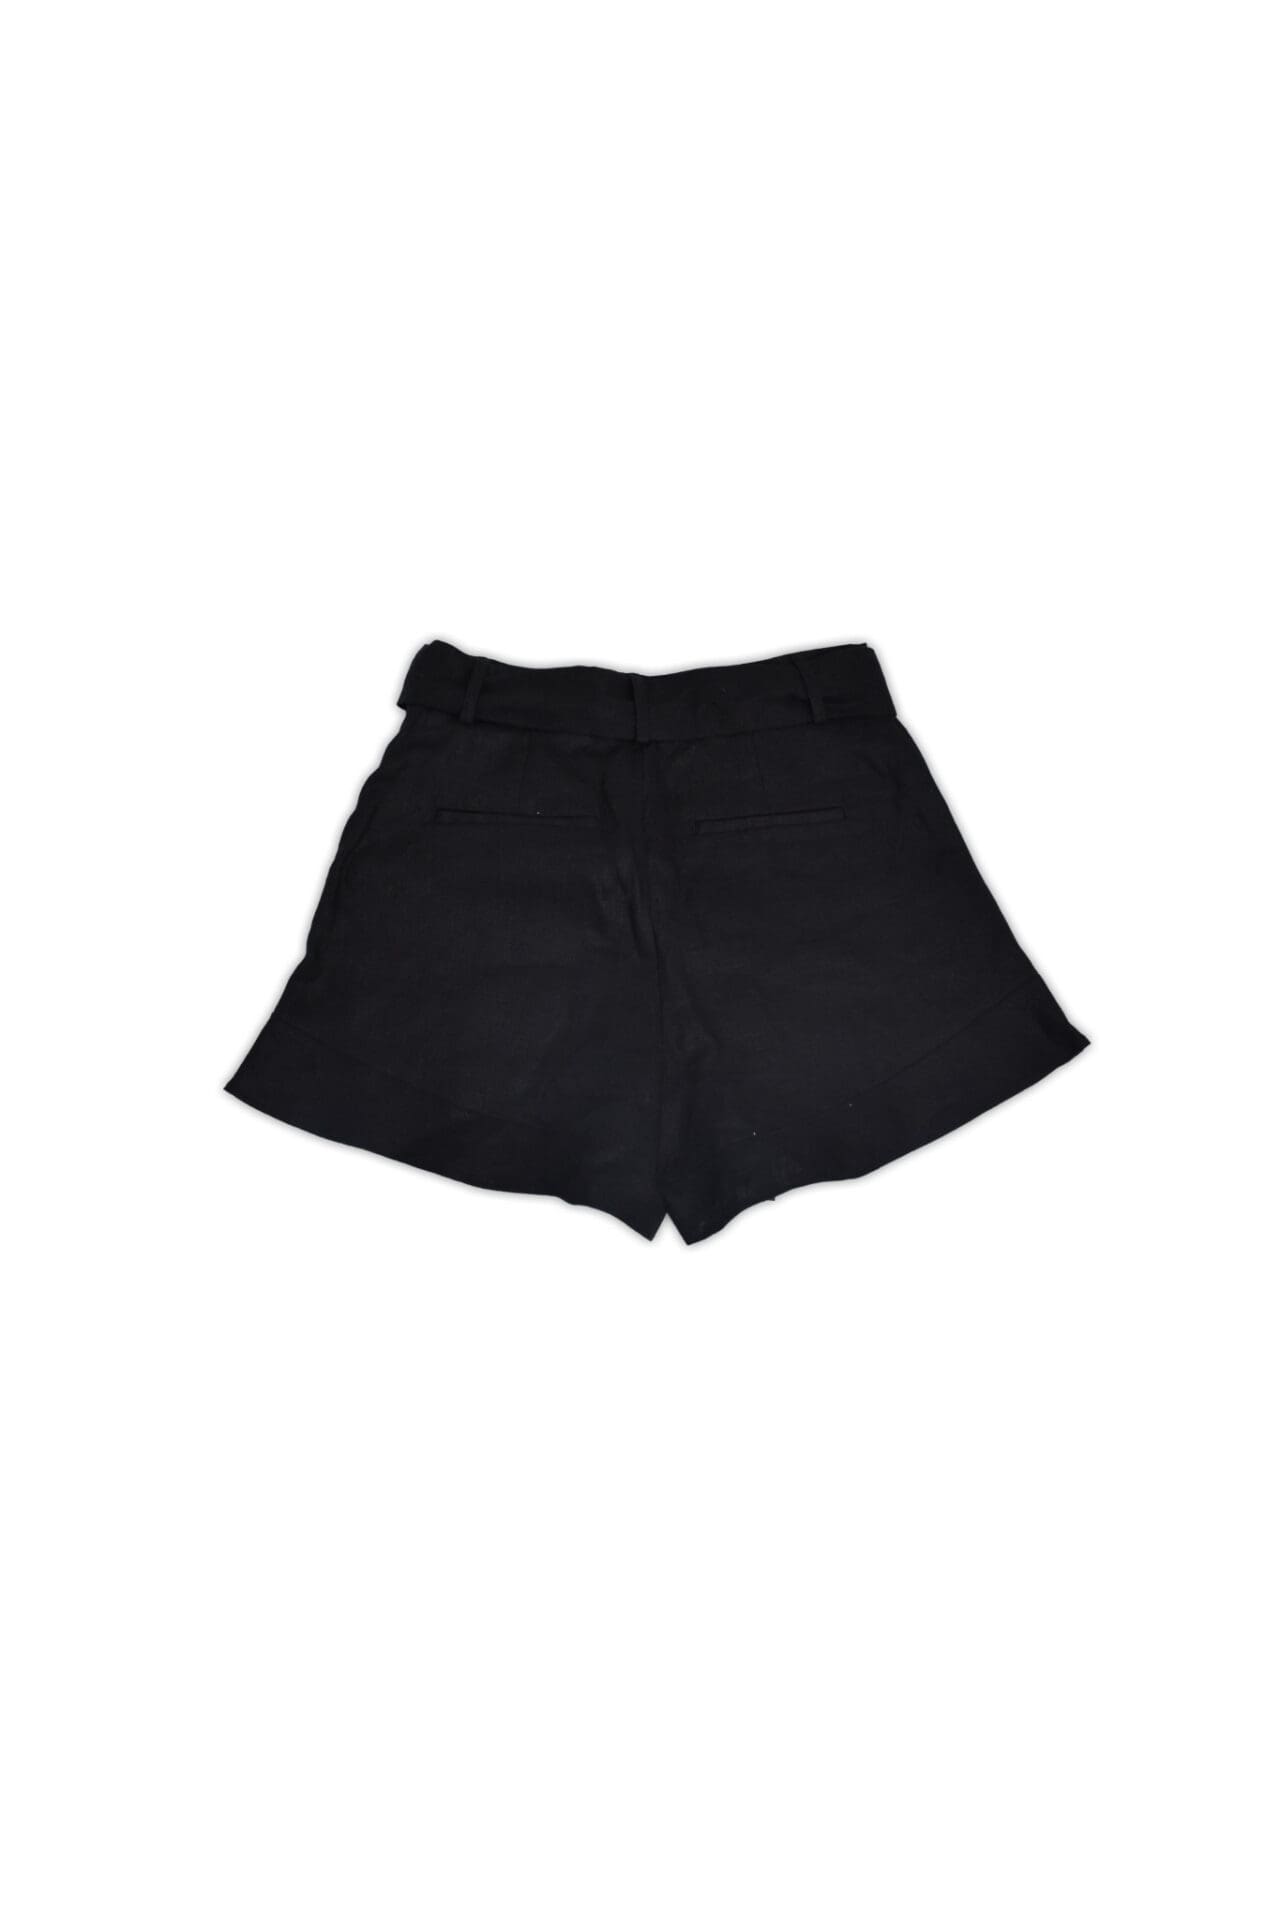 Black linen shorts with belt tie. Made in China.